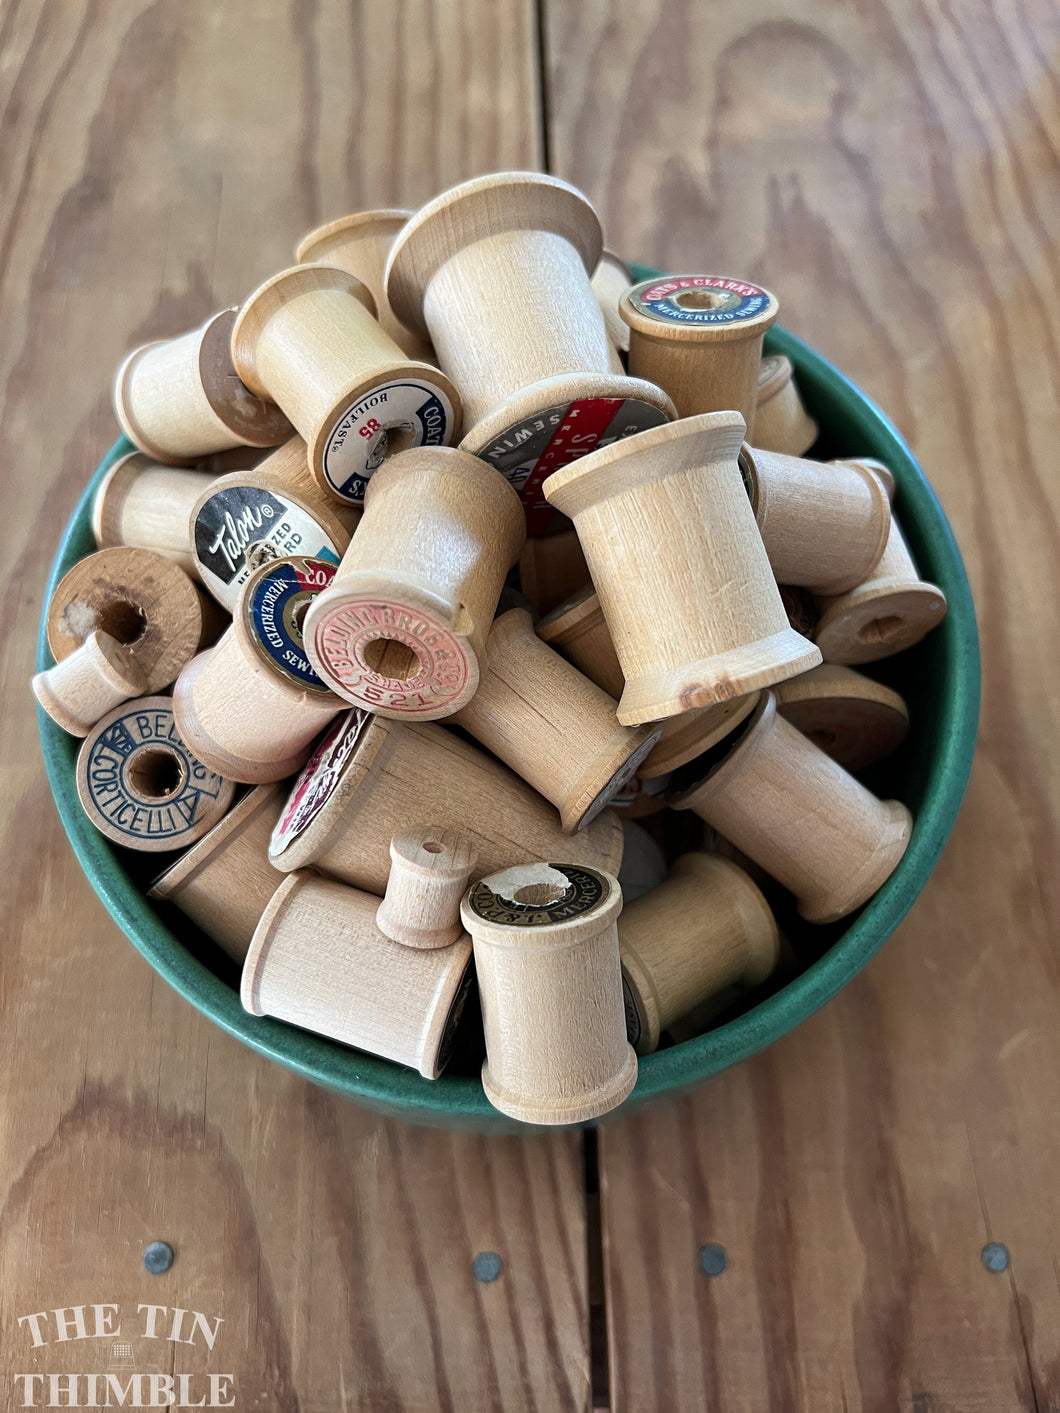 12 Vintage and Antique Wood Thread Spools - Lot of Assorted Sizes and Brands